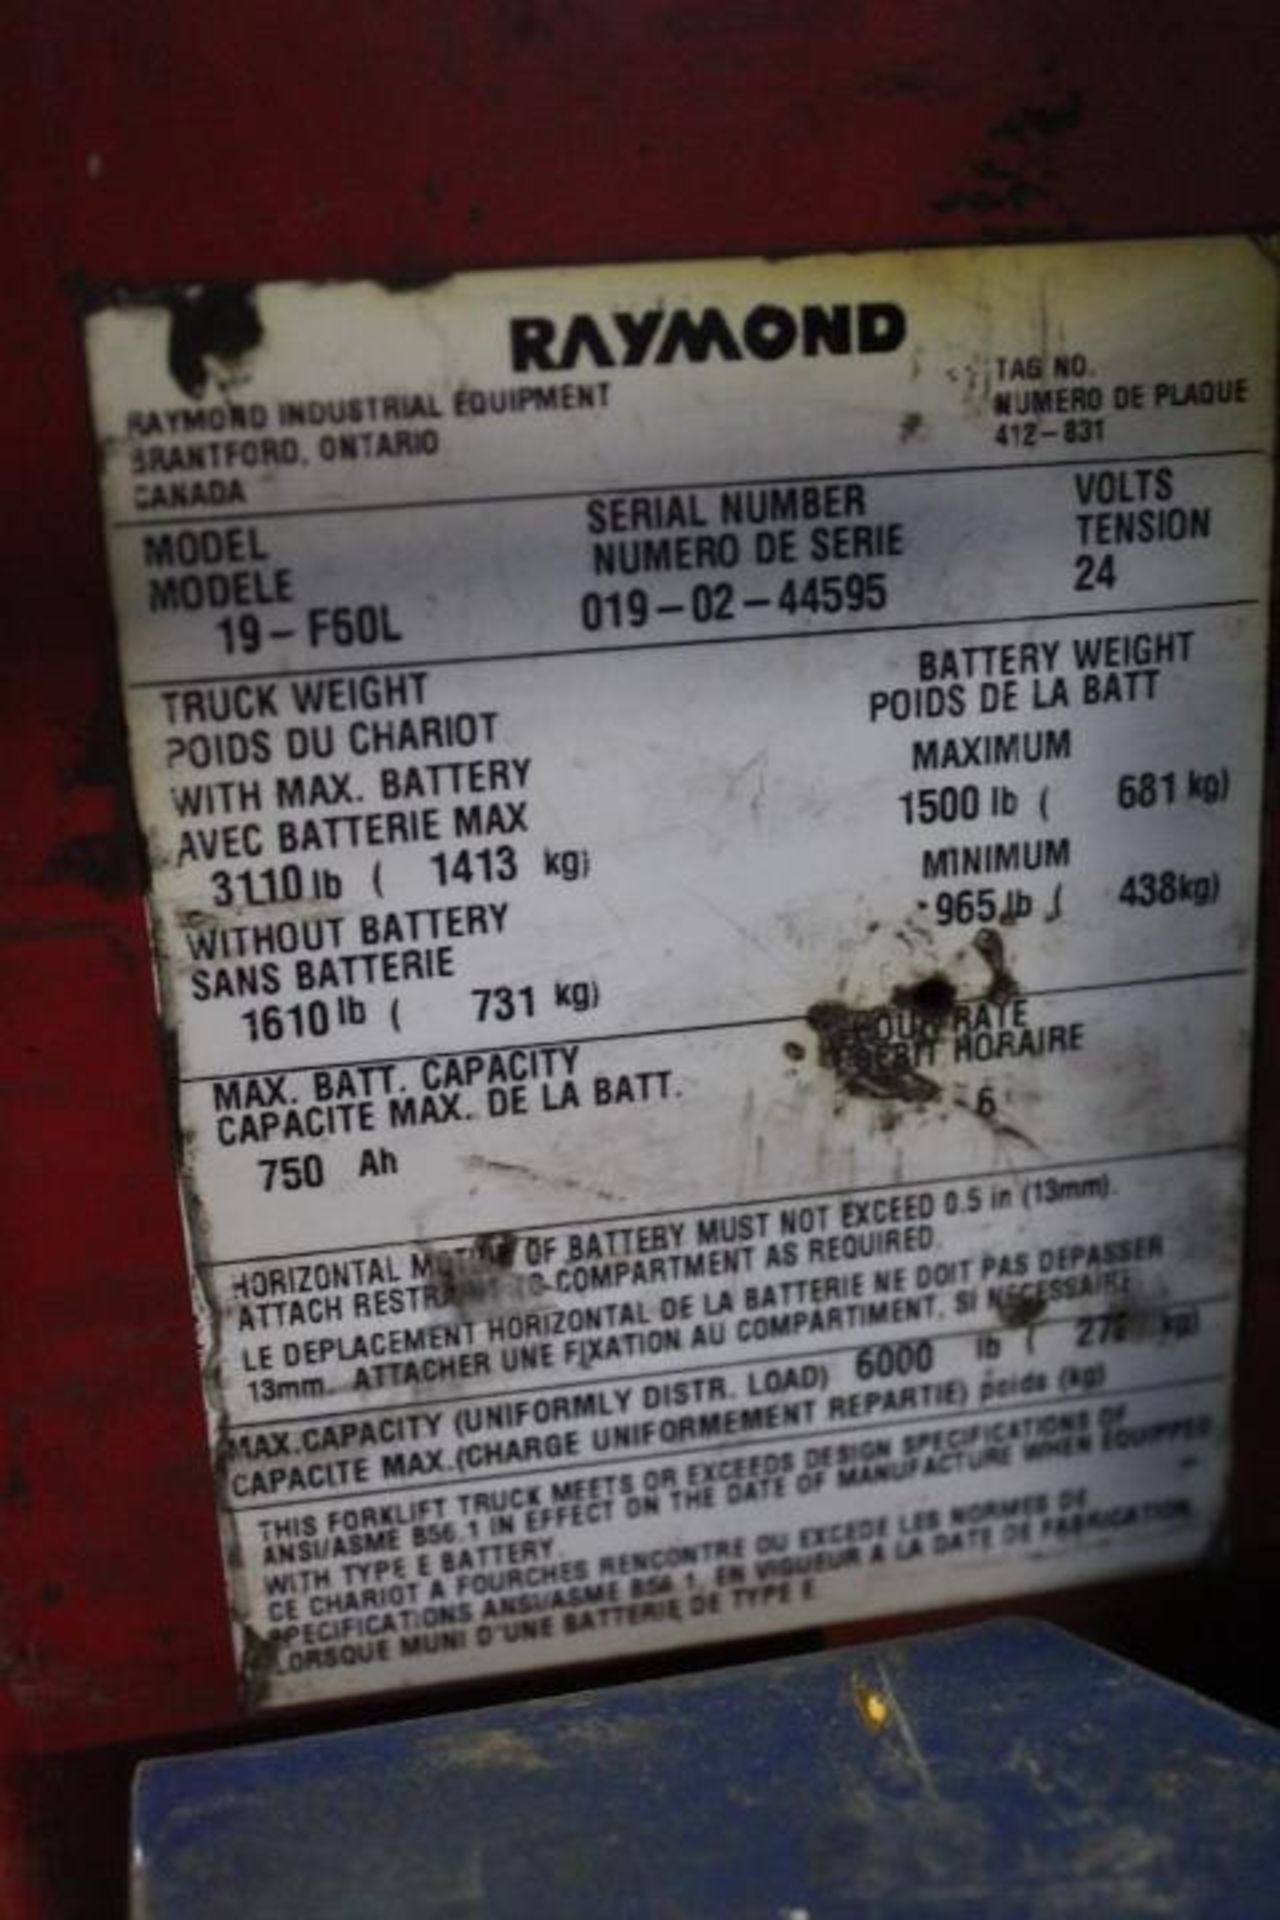 1X, RAYMOND PT423, 19-F60L-ELF 2002, 3871 HOURS, (EXPIRED LTI) COMES WITH BATTERY, PT-423 - Image 8 of 9